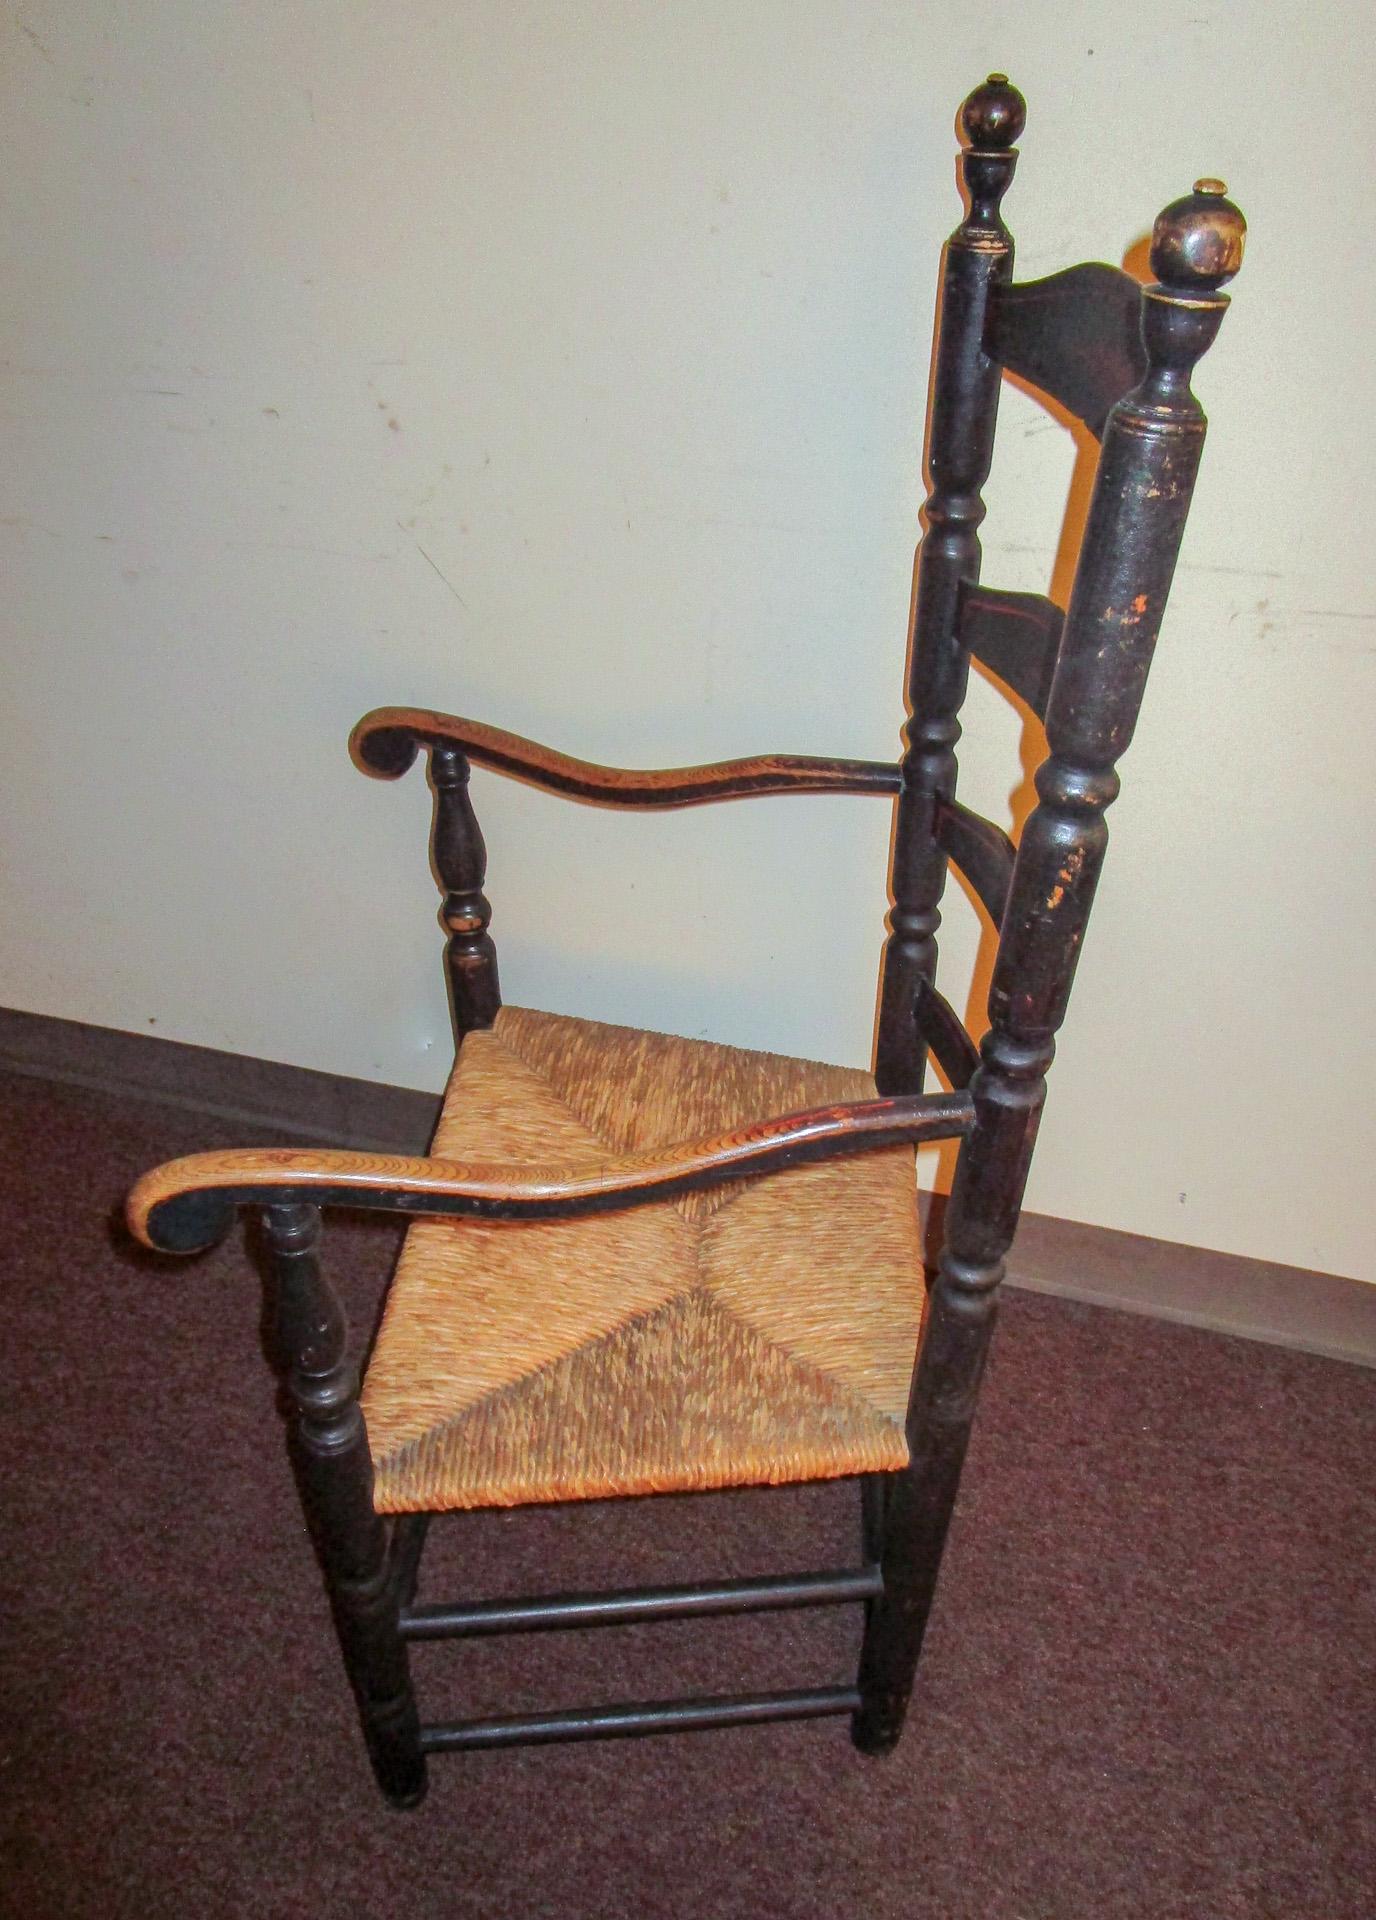 Late 18th Century 18thc American Stenciled Ladderback Chair with Rush Seat and Original Finish For Sale